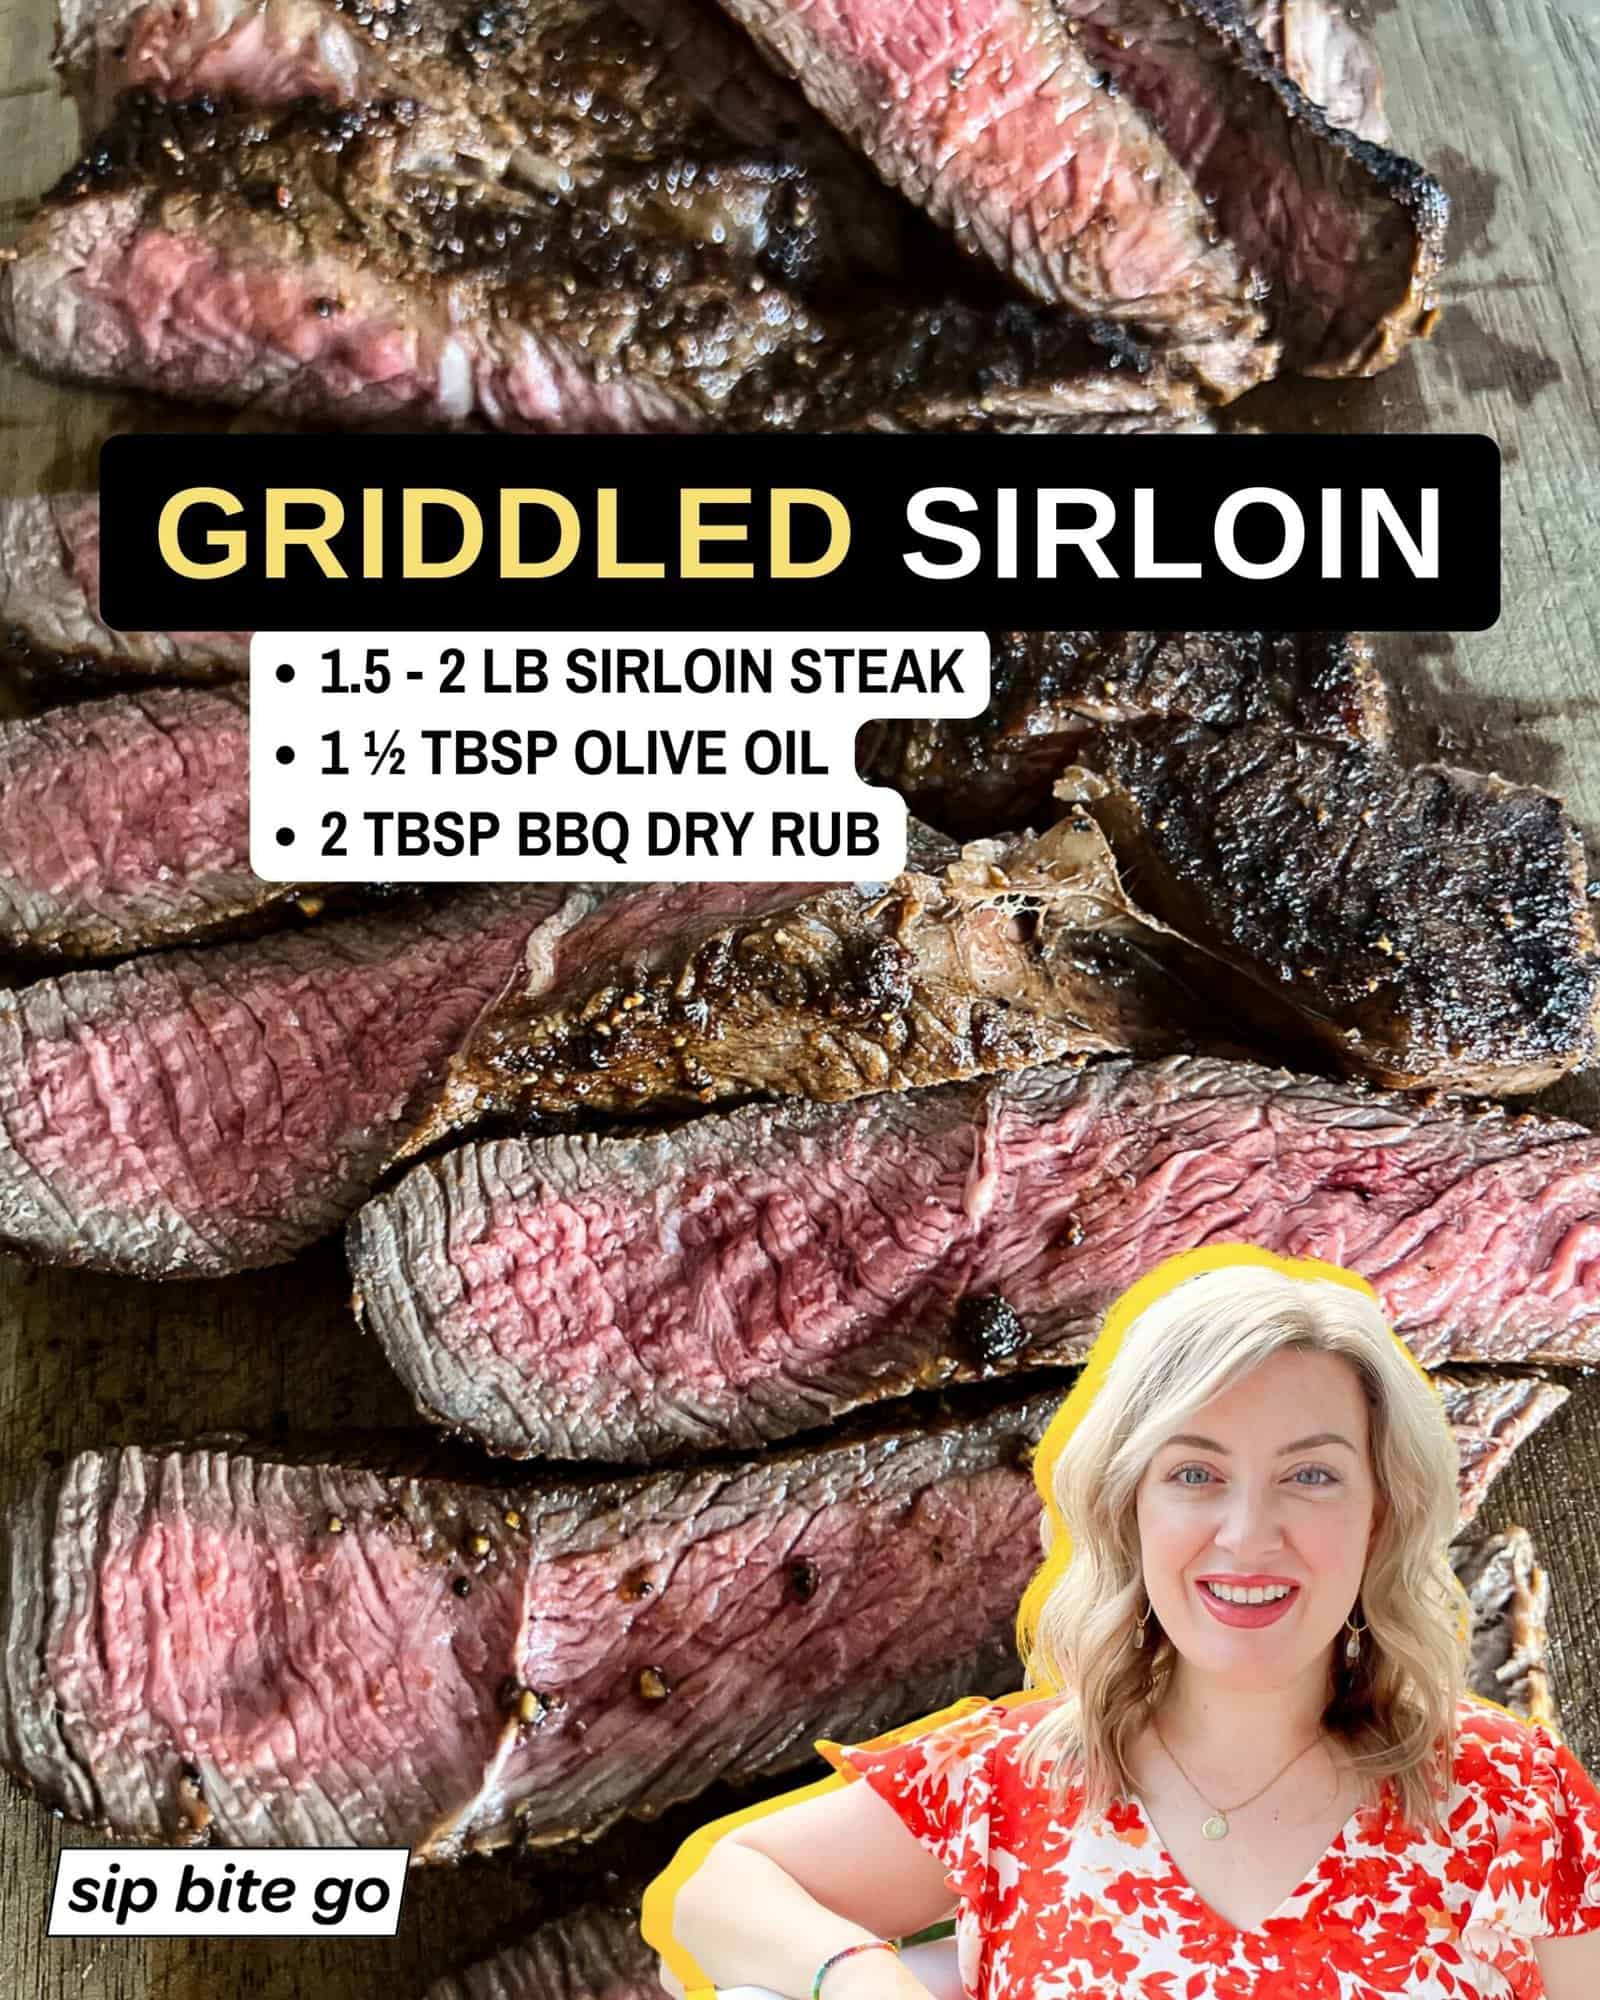 Infographic with list of ingredients for griddle cooking Sirloin Steak with Sip Bite Go logo